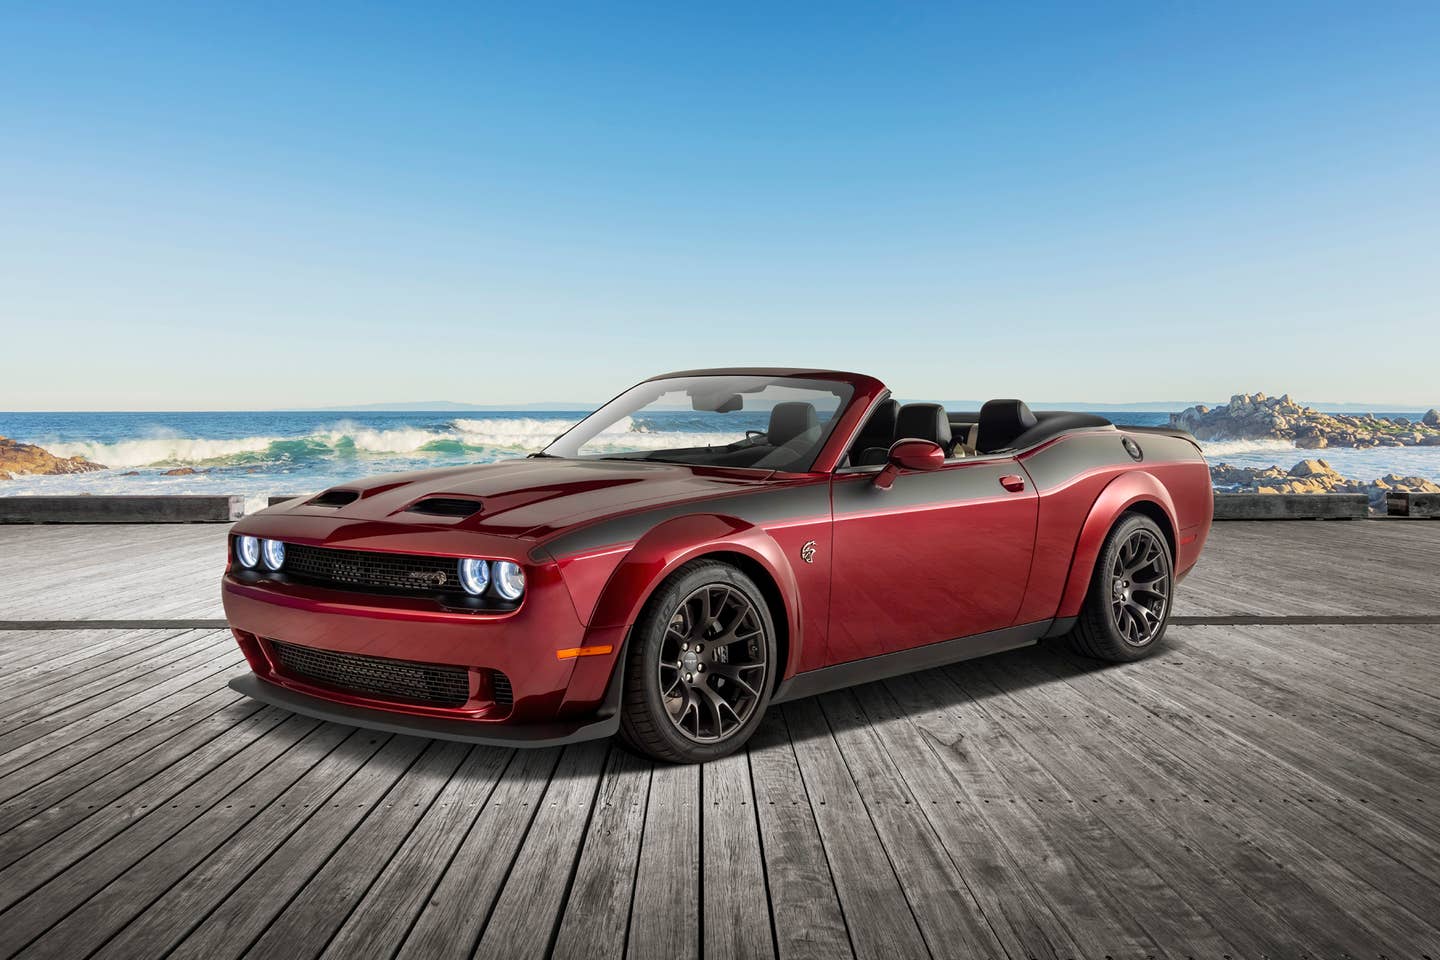 Dodge dealerships will offer an expedited ordering process for aftermarket convertible modifications for the 2022 Dodge Challenger through Drop Top Customs, the oldest convertible coachbuilder in the U.S. Convertible aftermarket modifications through Drop Top Customs will also be available for the 2023 Dodge Challenger when orders open for the new model year.